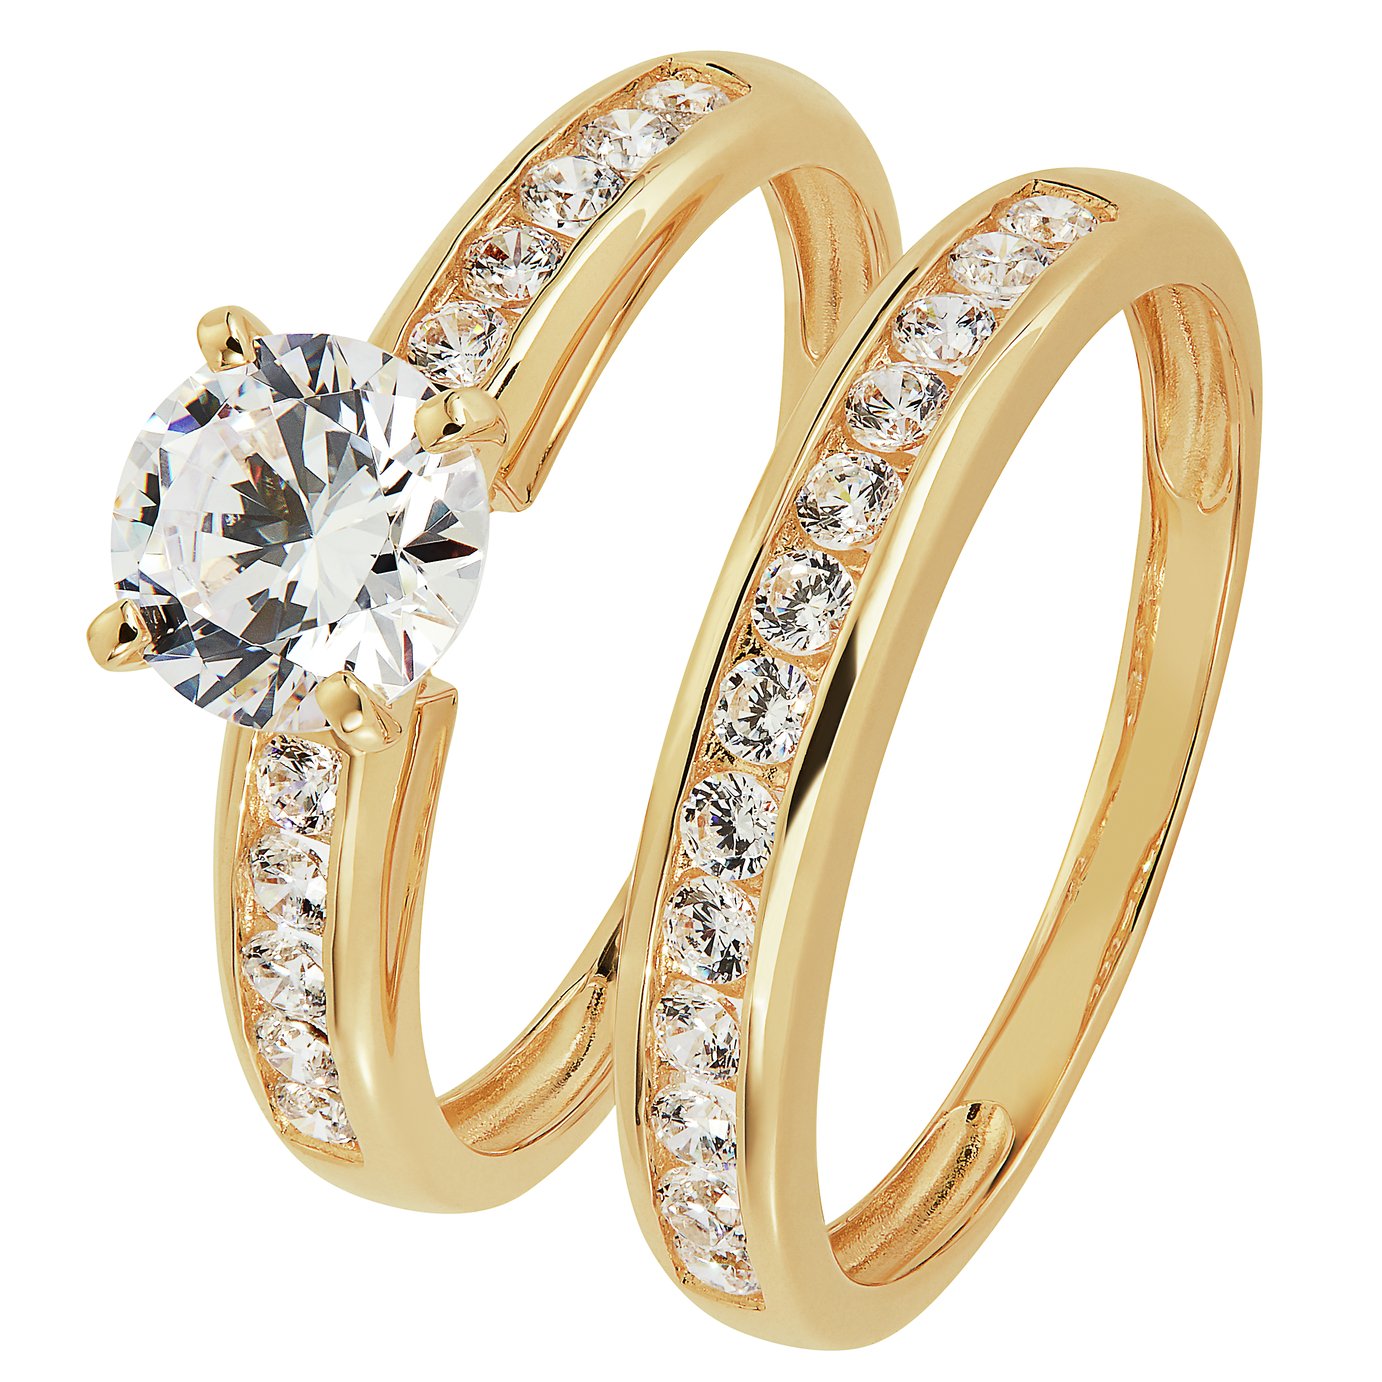 Revere 9ct Gold Cubic Zirconia Solitaire Engagement Ring - L